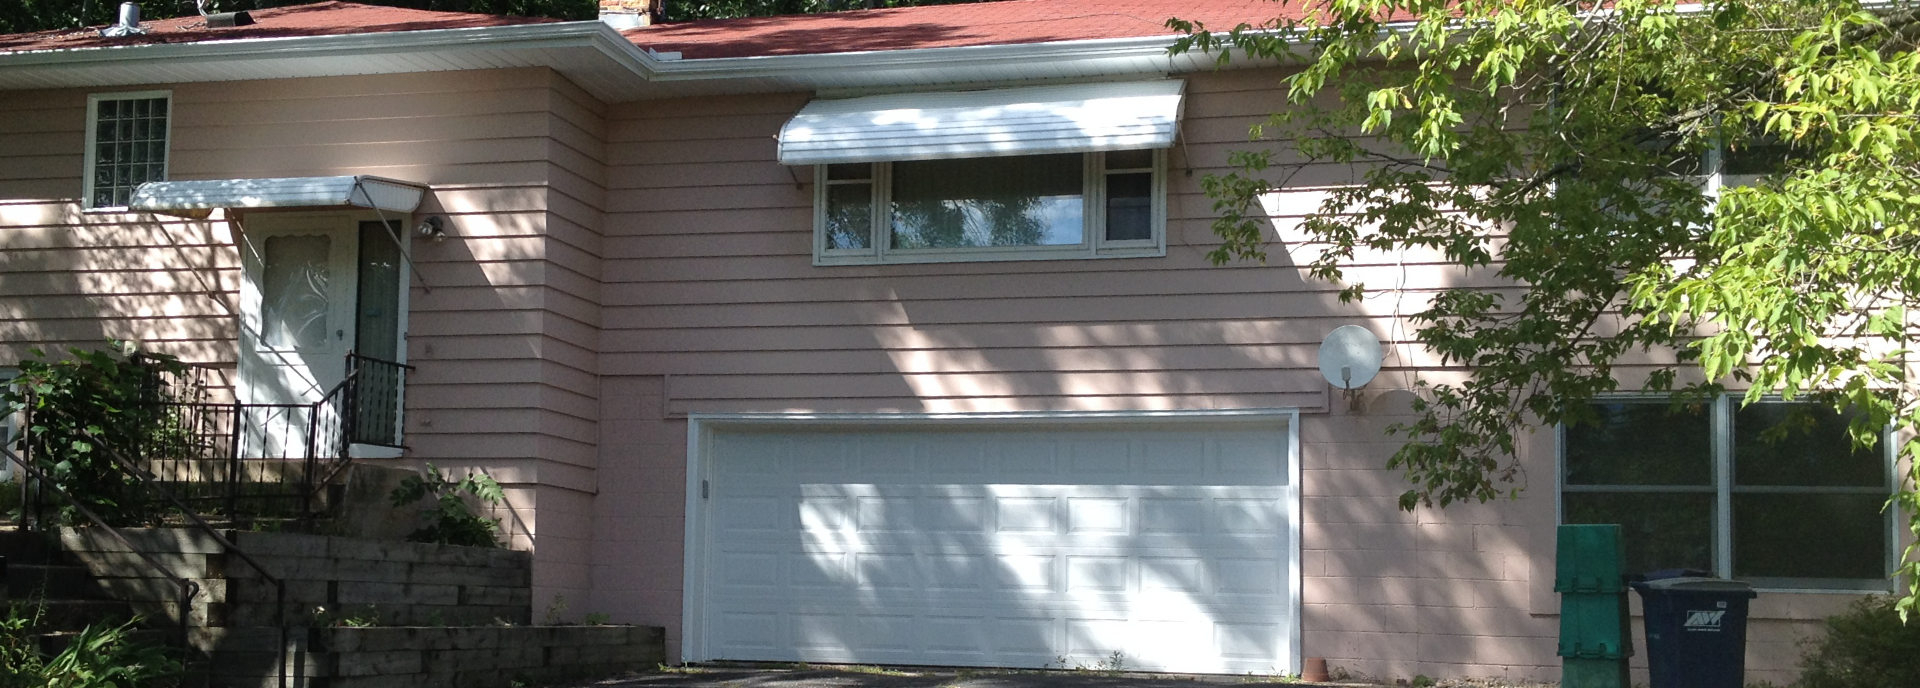 Garage Residential Exterior Painting After